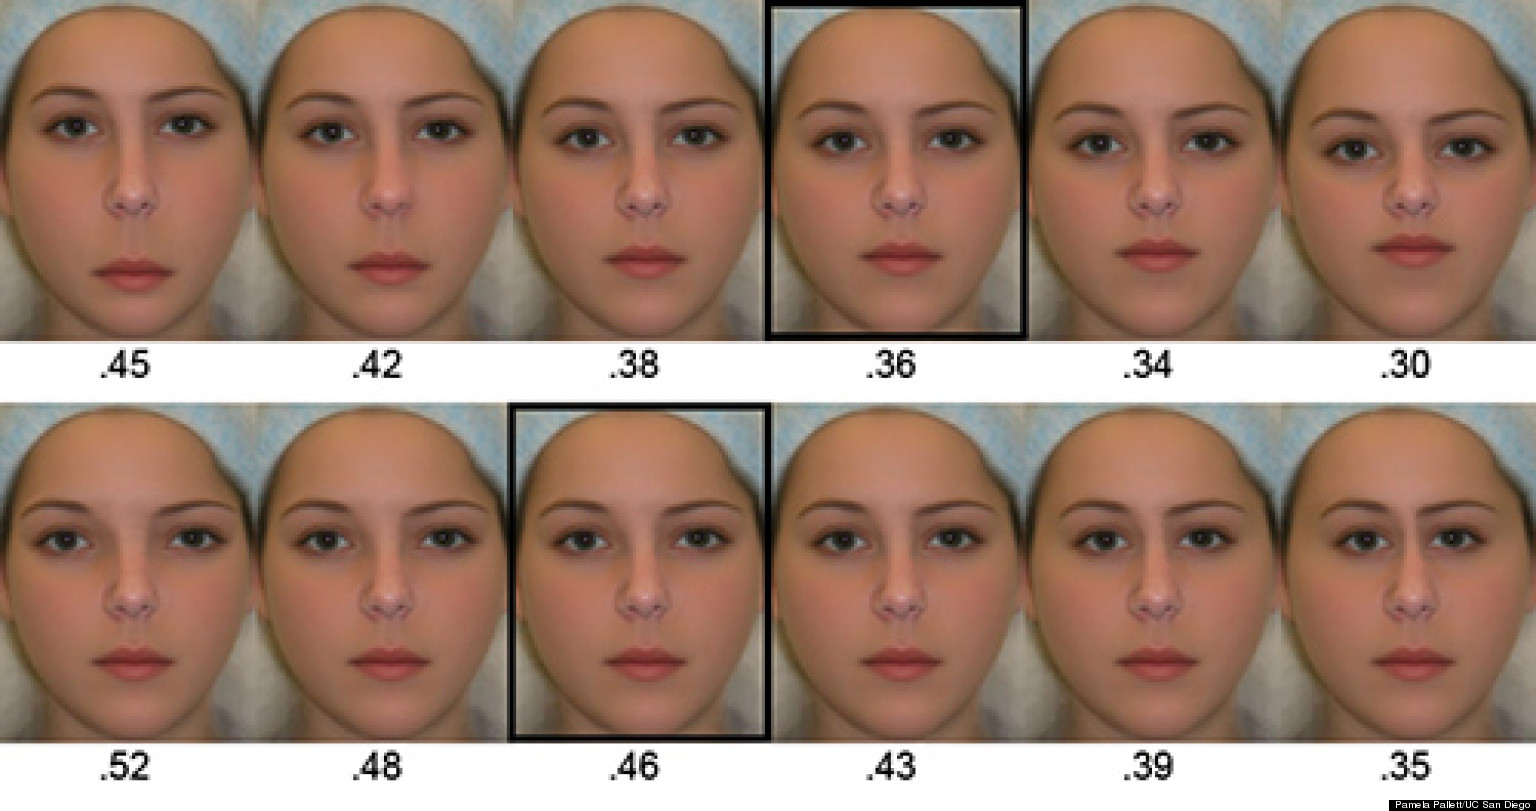 science-of-beauty-4-physical-traits-that-help-define-female-facial-attractiveness-video